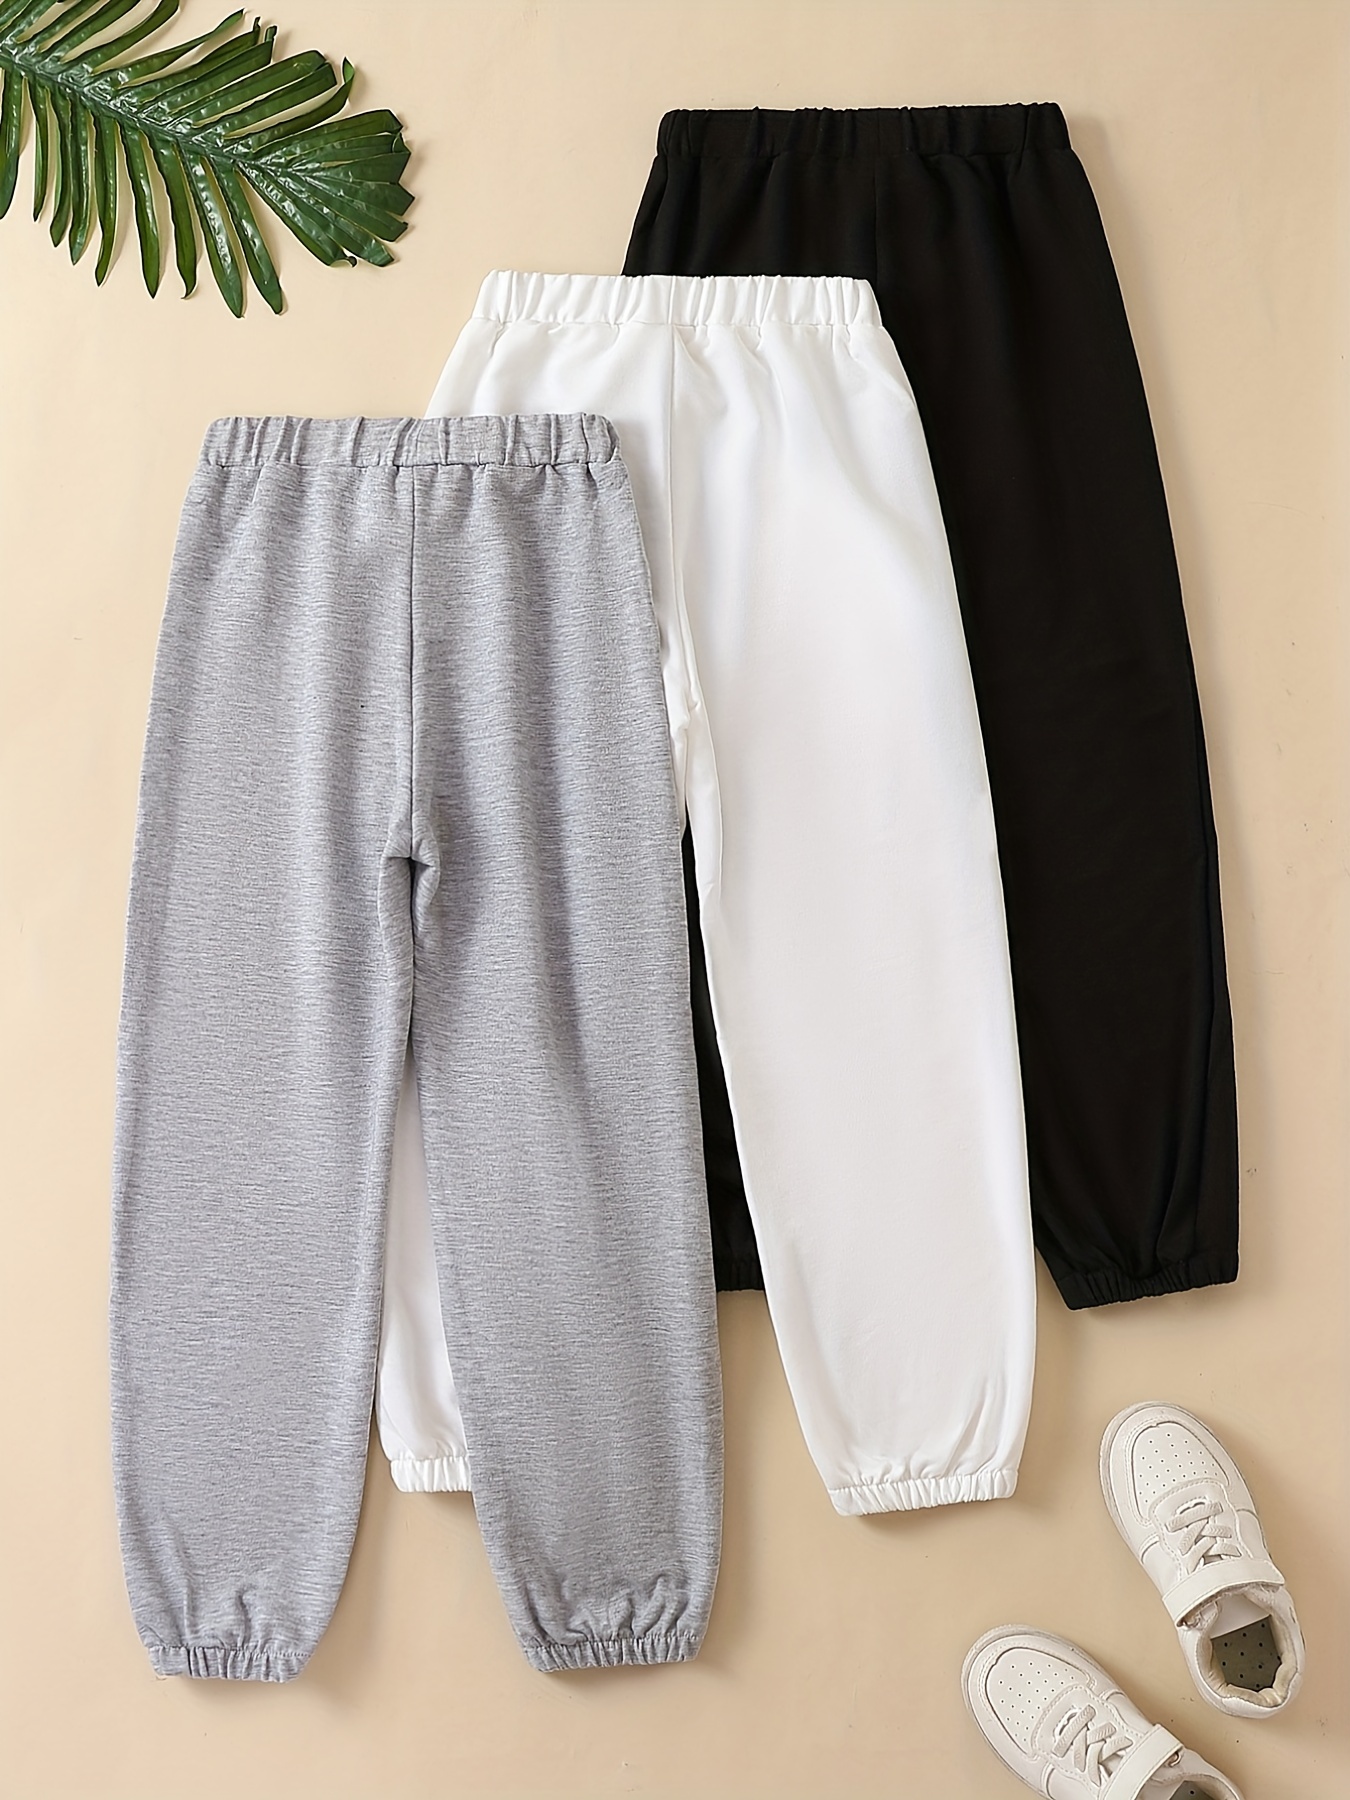 Women's Relaxed Active Cotton Sweatpants, Breathable Stretchy